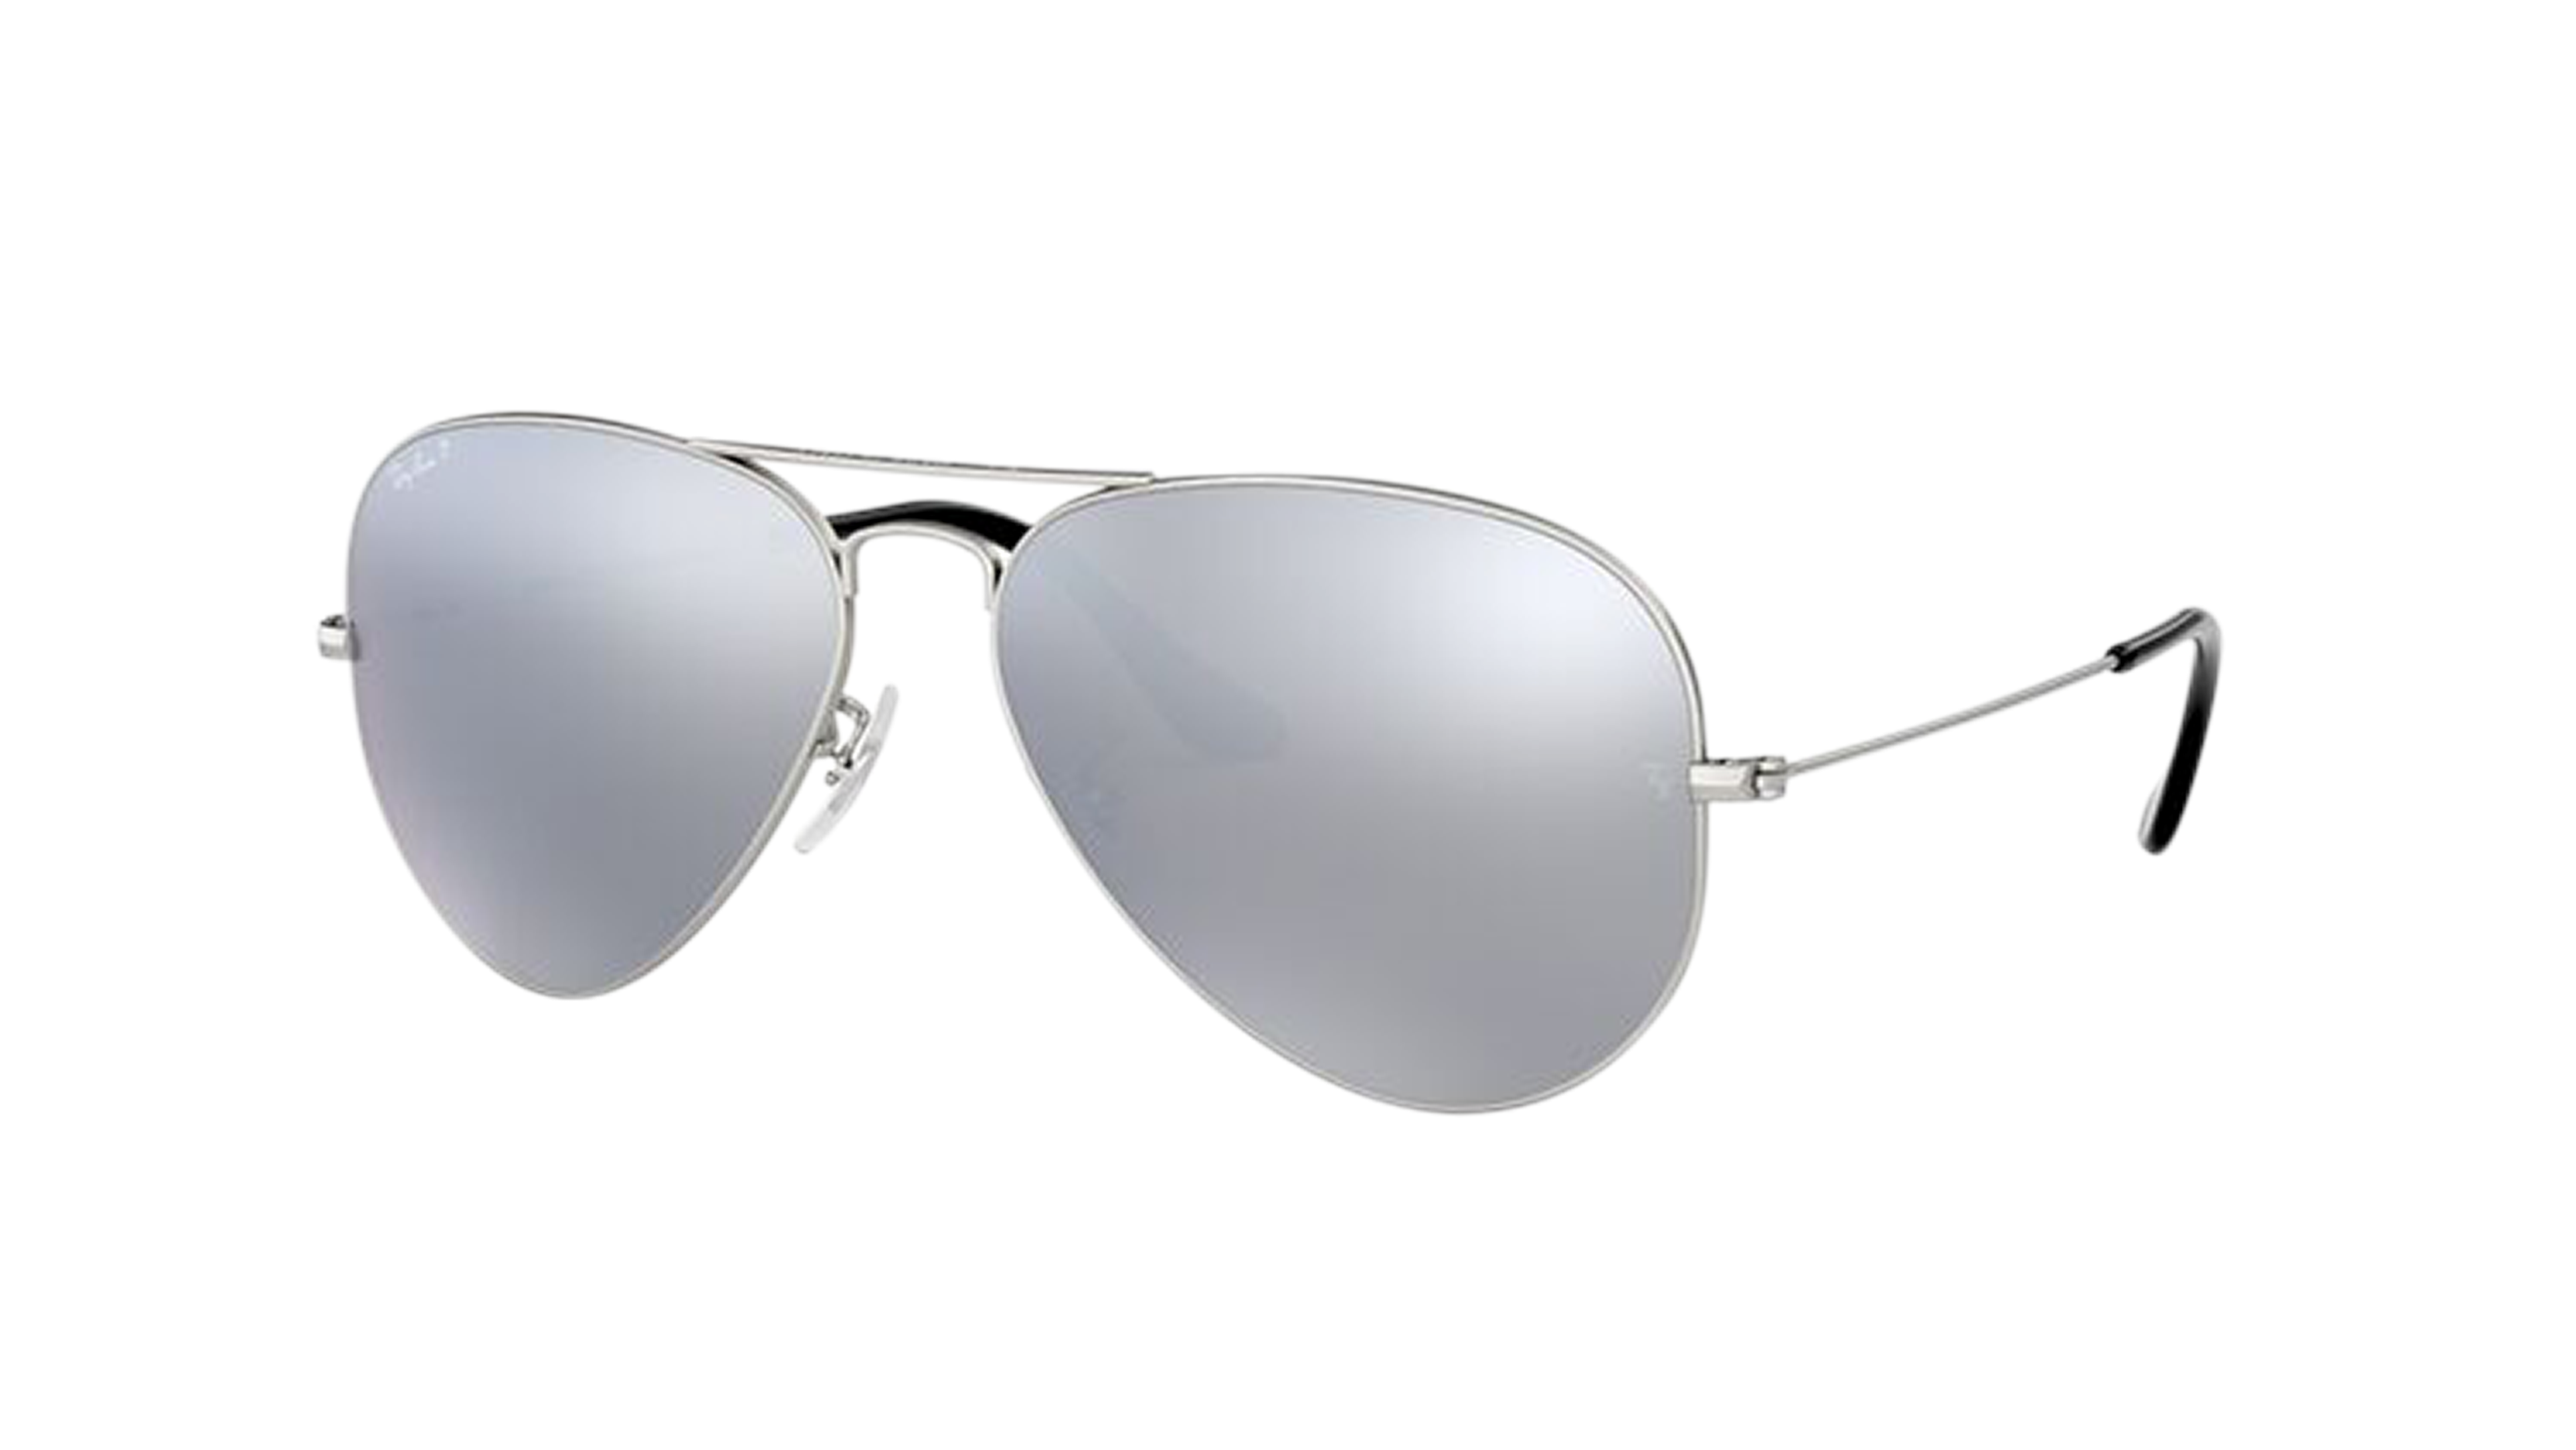 Angle_Left01 Ray-Ban Aviator Mirror RB3025 019/W3 Grijs / Zilver